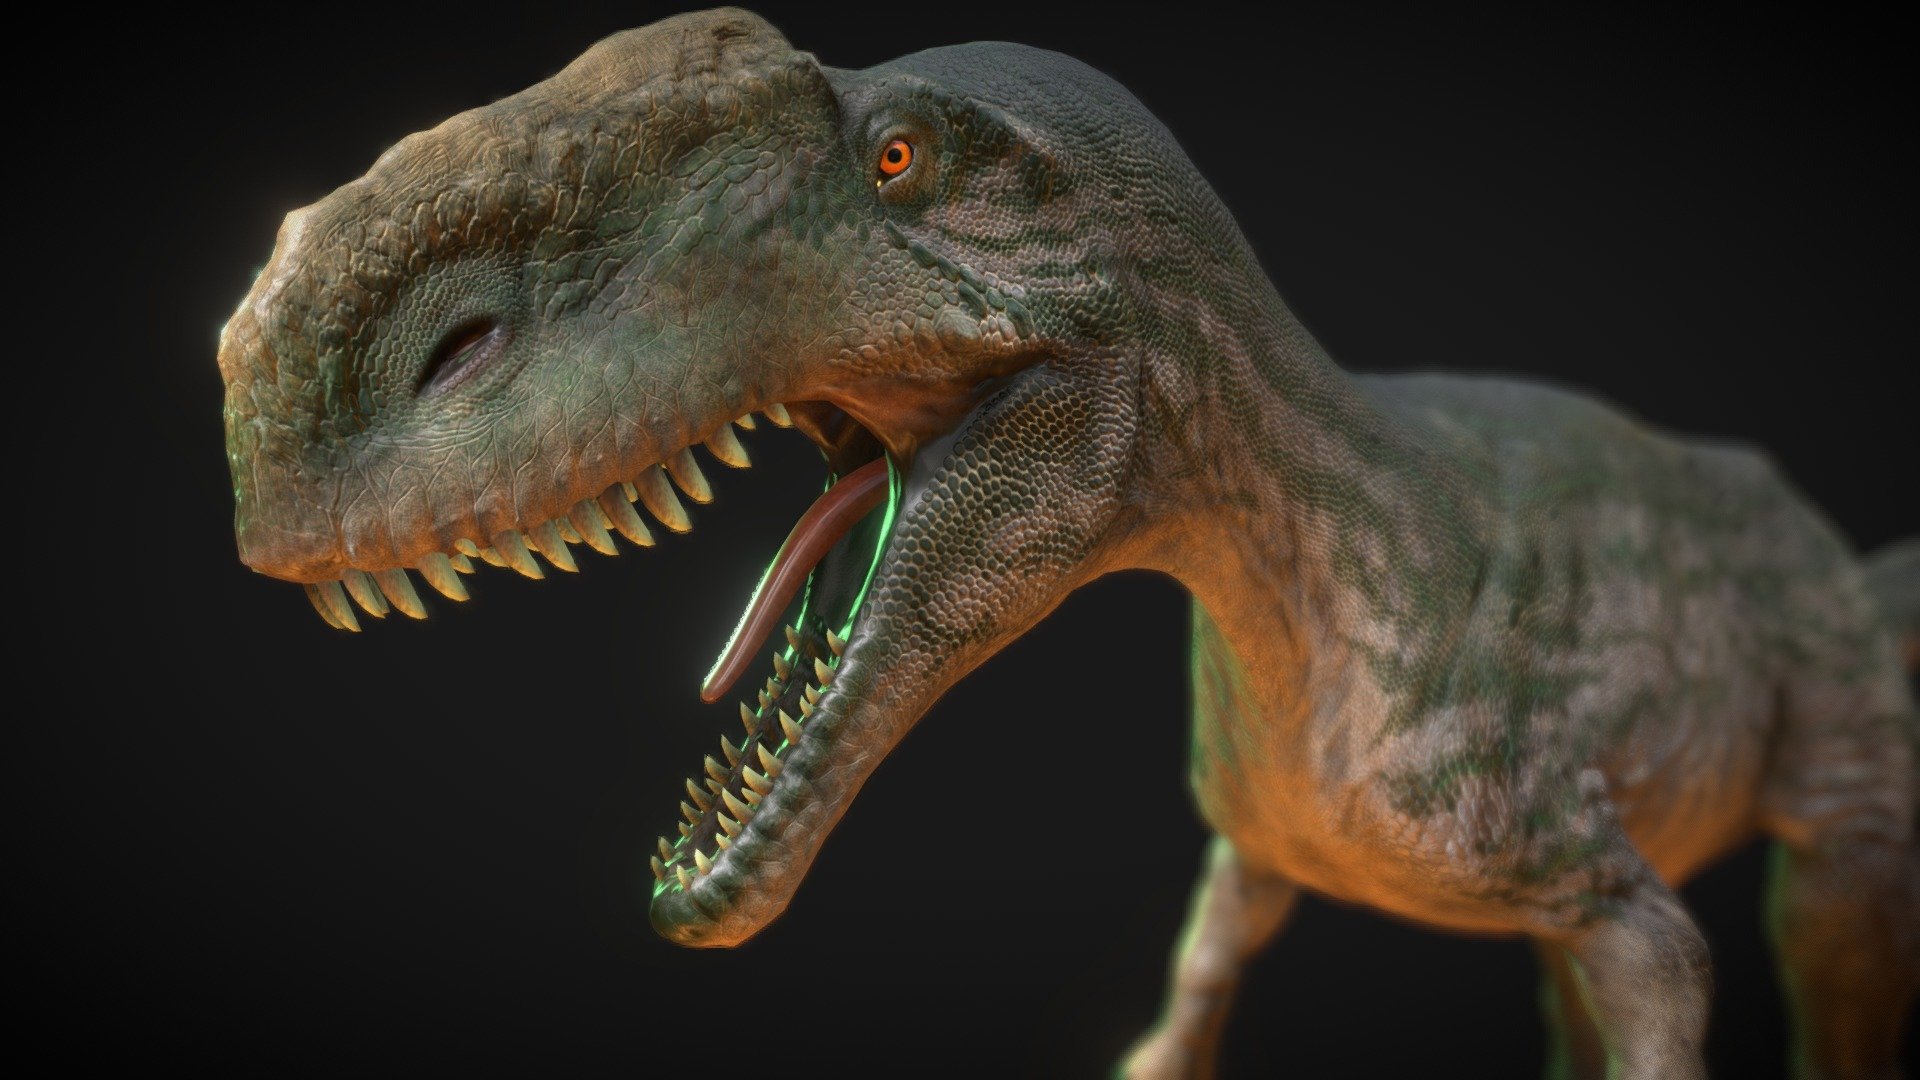 Monolophosaurus, a dinosaur from the Middle Jurassic period, steps into the prehistoric spotlight with its distinctive crest. This theropod, known for its single crest on the top of its skull, roamed the ancient landscapes of what is now China.

With a bipedal stance and sharp teeth, Monolophosaurus was a carnivorous predator, likely hunting smaller dinosaurs and other prey. While its crest was not as elaborate as some other crested dinosaurs, it adds to the diversity of theropods from the Jurassic era.

Embark on a journey to the Middle Jurassic with Monolophosaurus, a unique theropod that adds a touch of intrigue to the dinosaur kingdom. Explore the mysteries of this crested dinosaur with - Monolophosaurus - Buy Royalty Free 3D model by robertfabiani 3d model